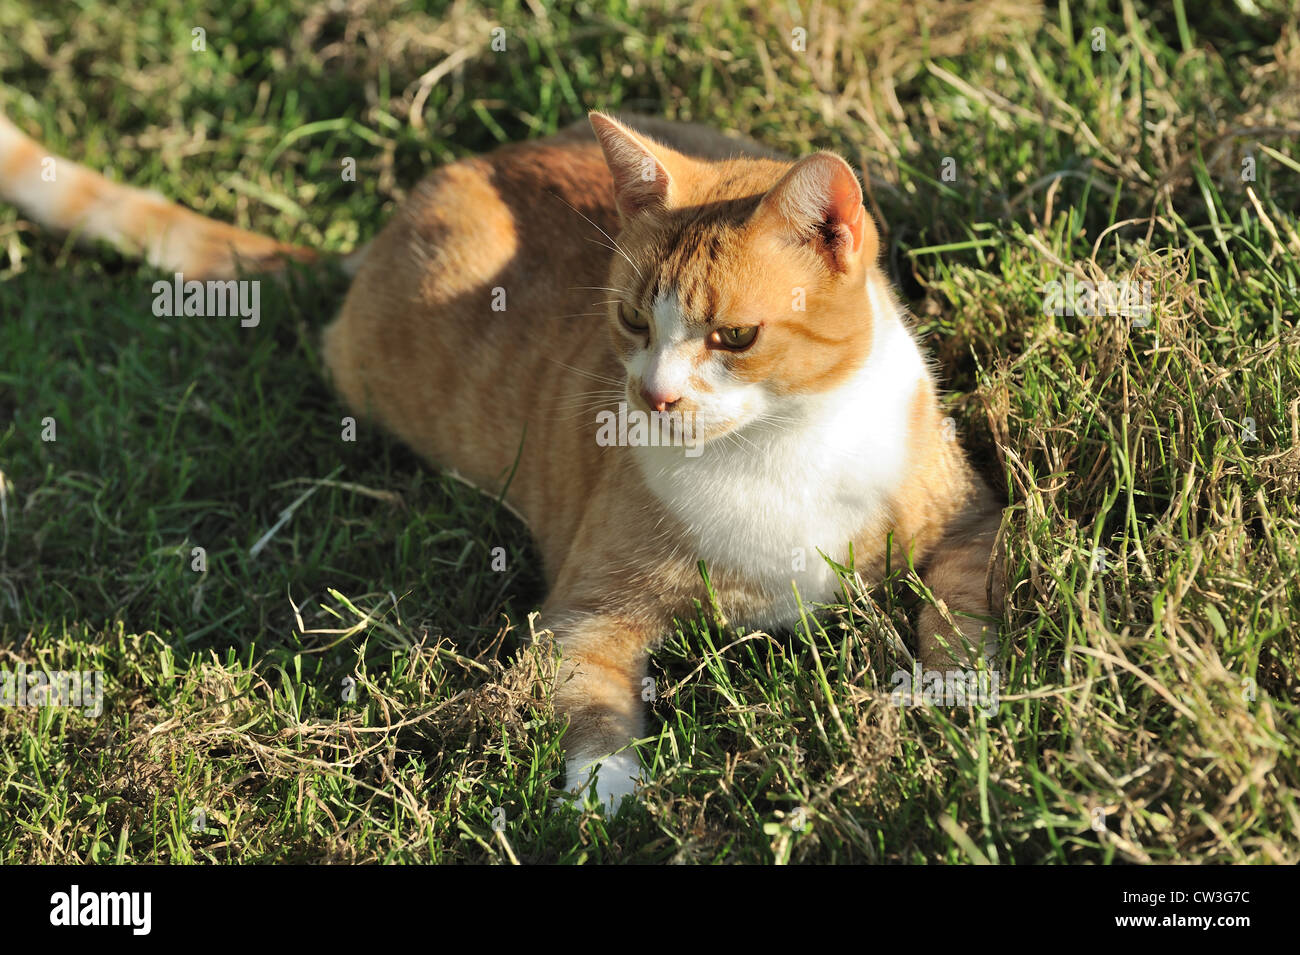 A ginger cat with a white 'bib' lying on grass Stock Photo